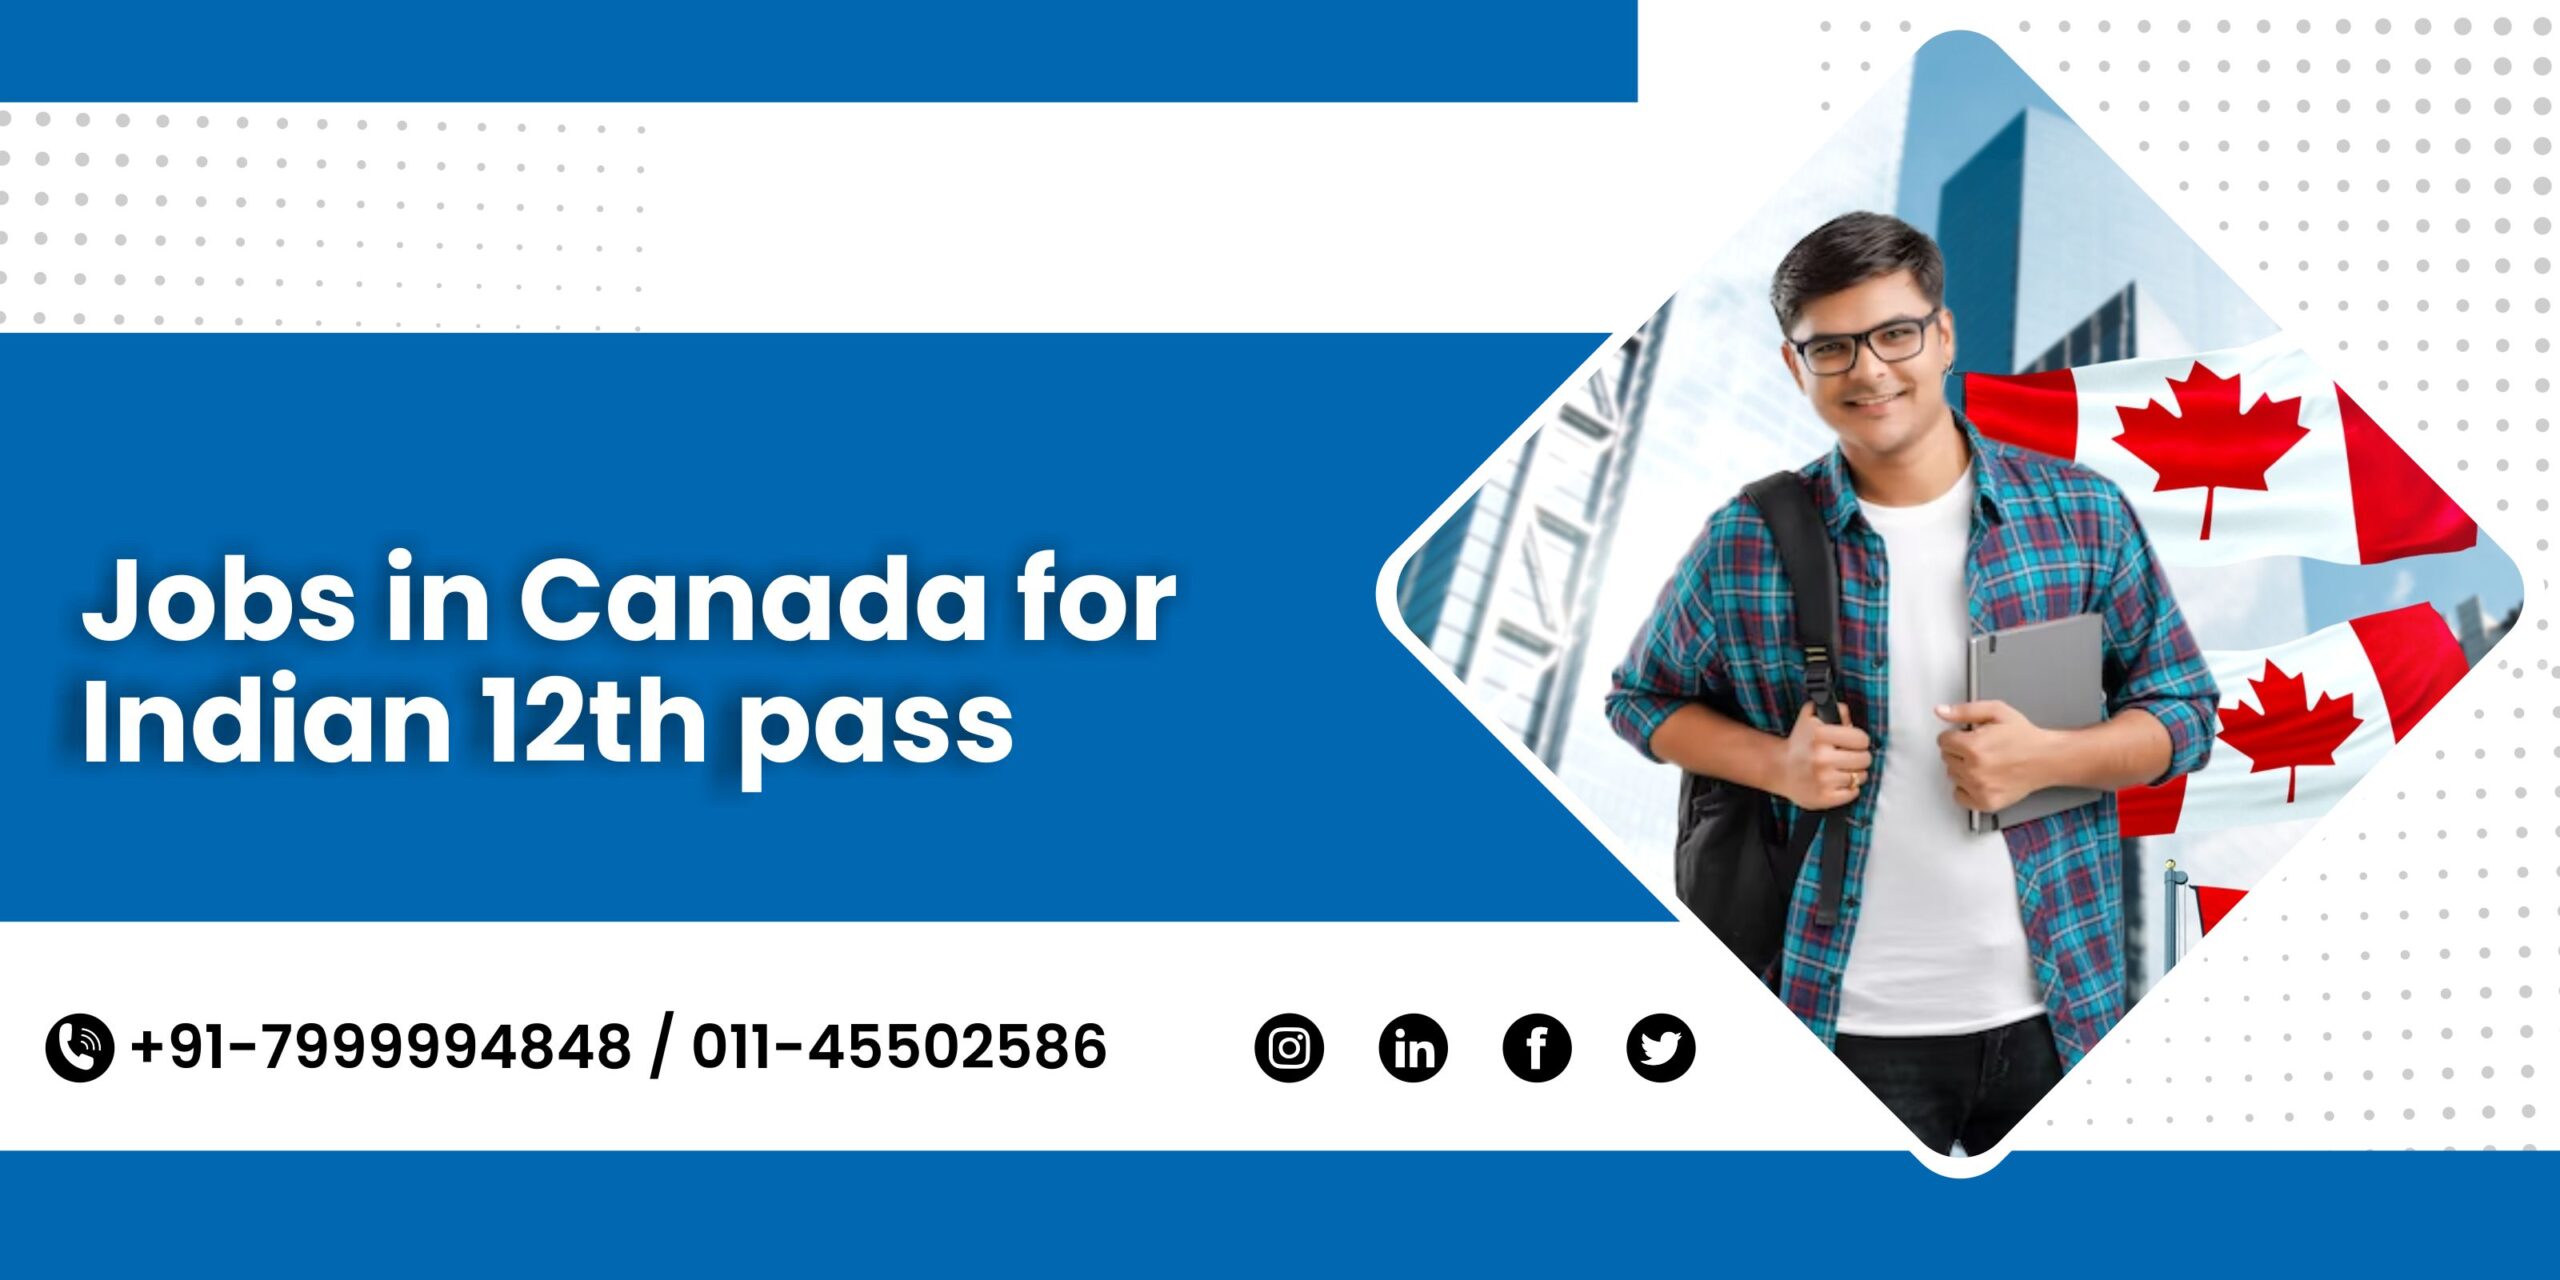 Jobs in Canada for Indian 12th pass